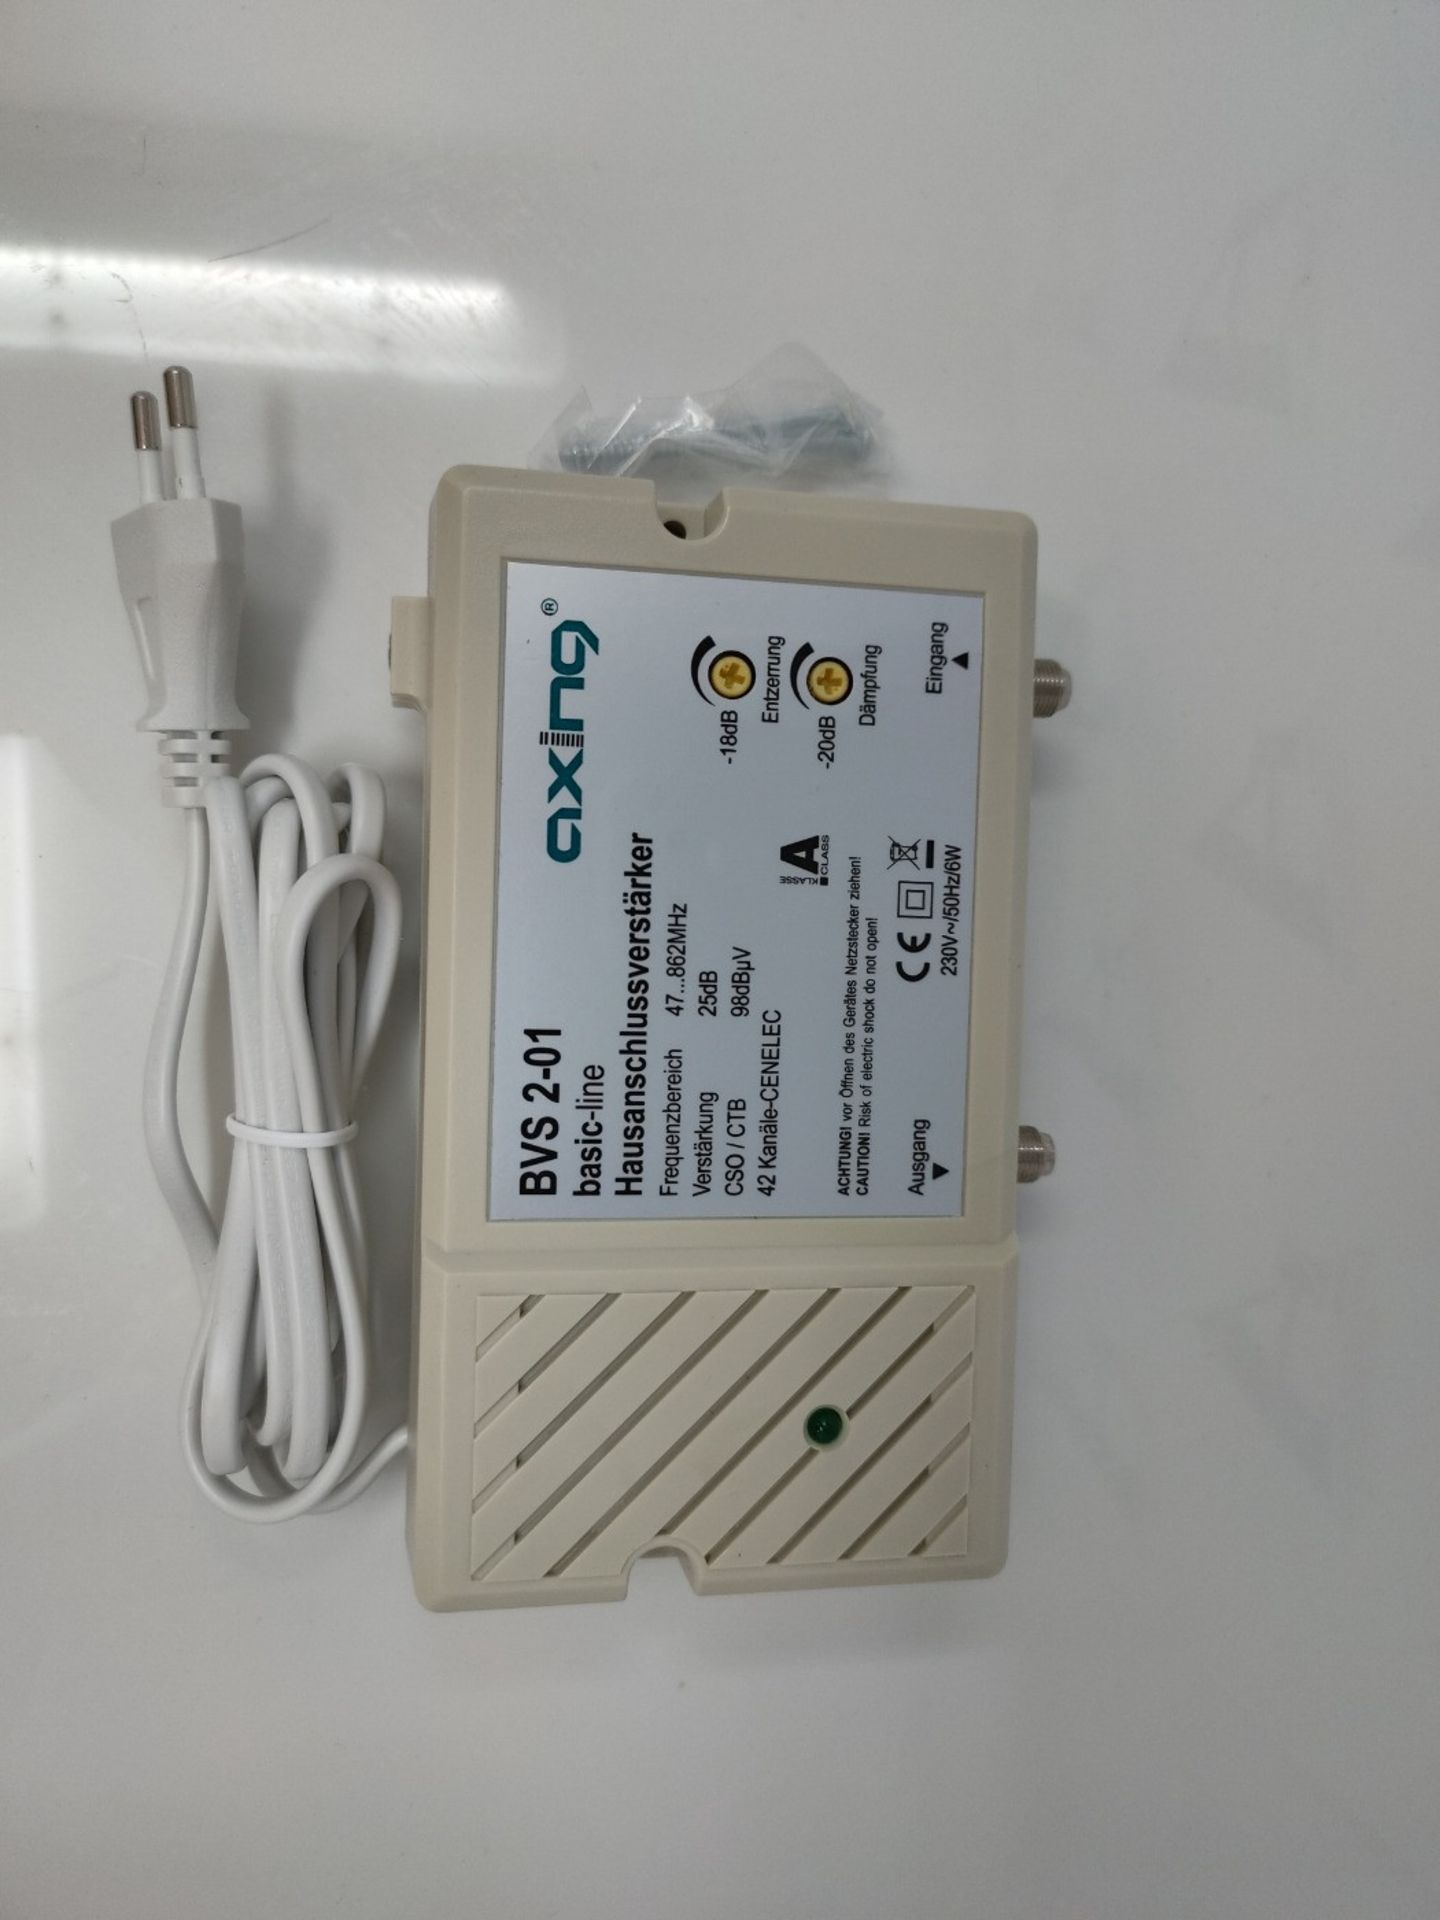 Axing BVS 2-01 house connection amplifier 25 dB for digital cable television (47-862 M - Image 3 of 3